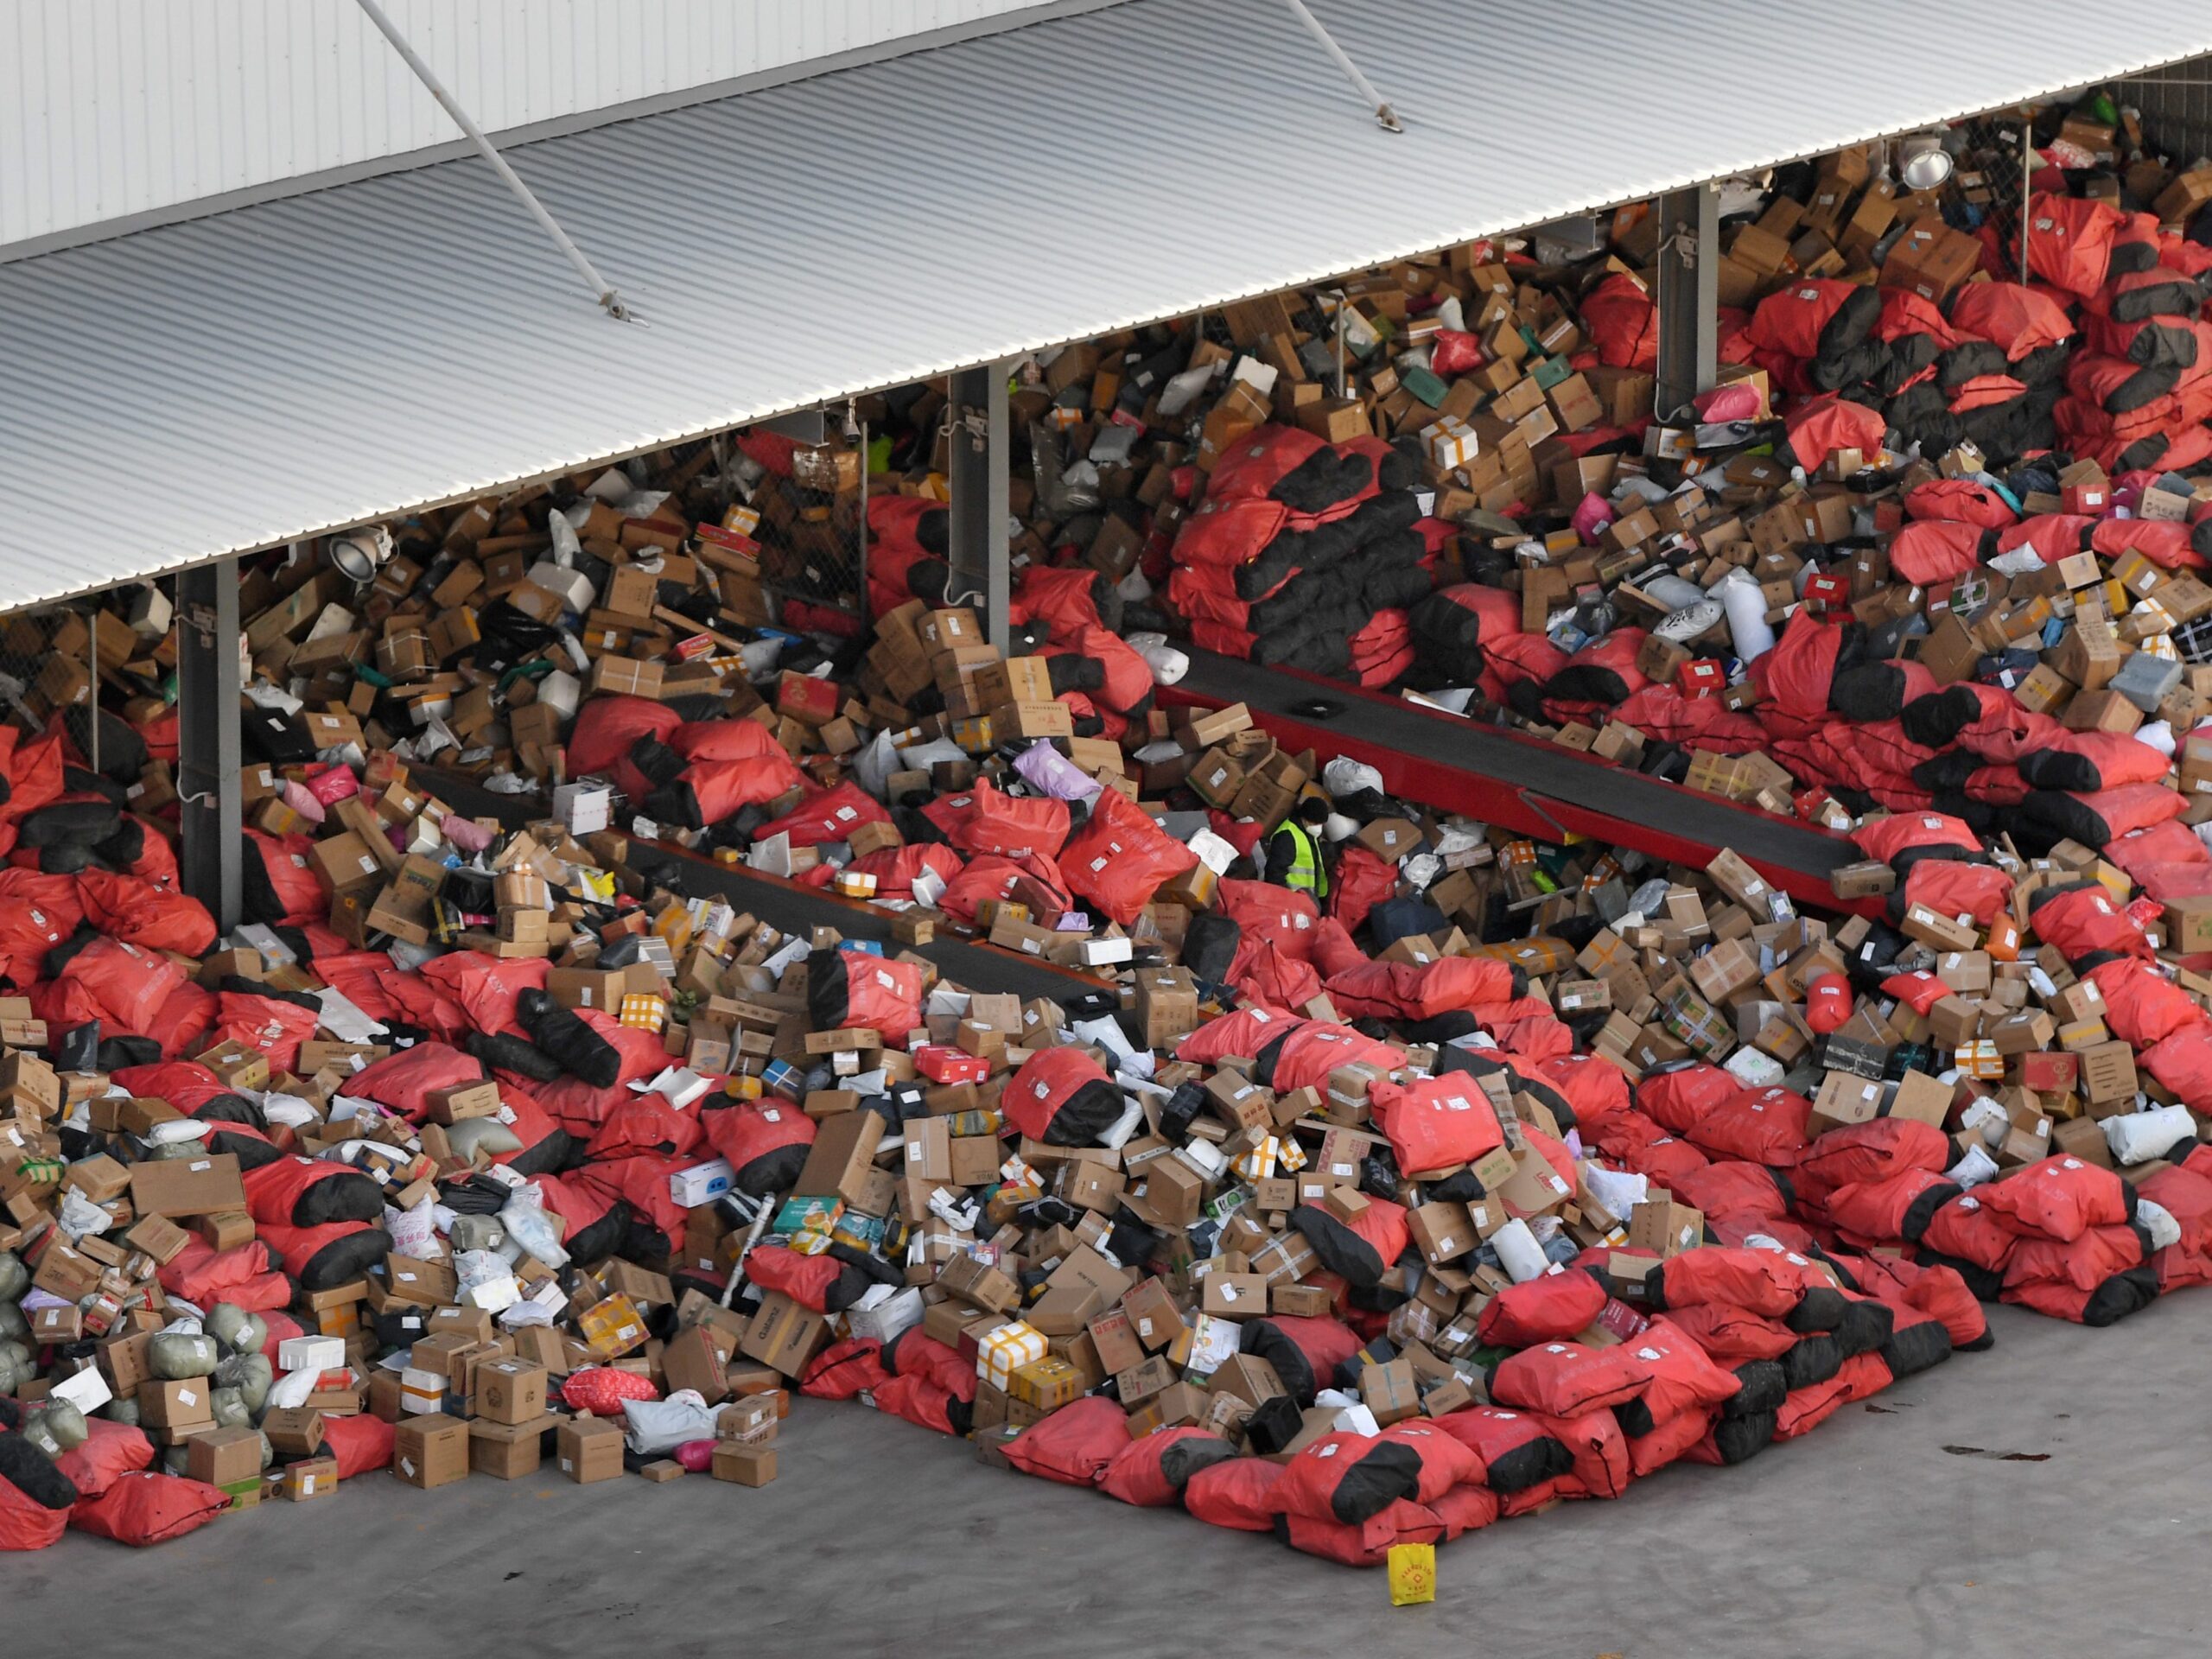 Thousands of packages, some in red sacks, are piled up in a Chinese warehouse ready to be delivered.